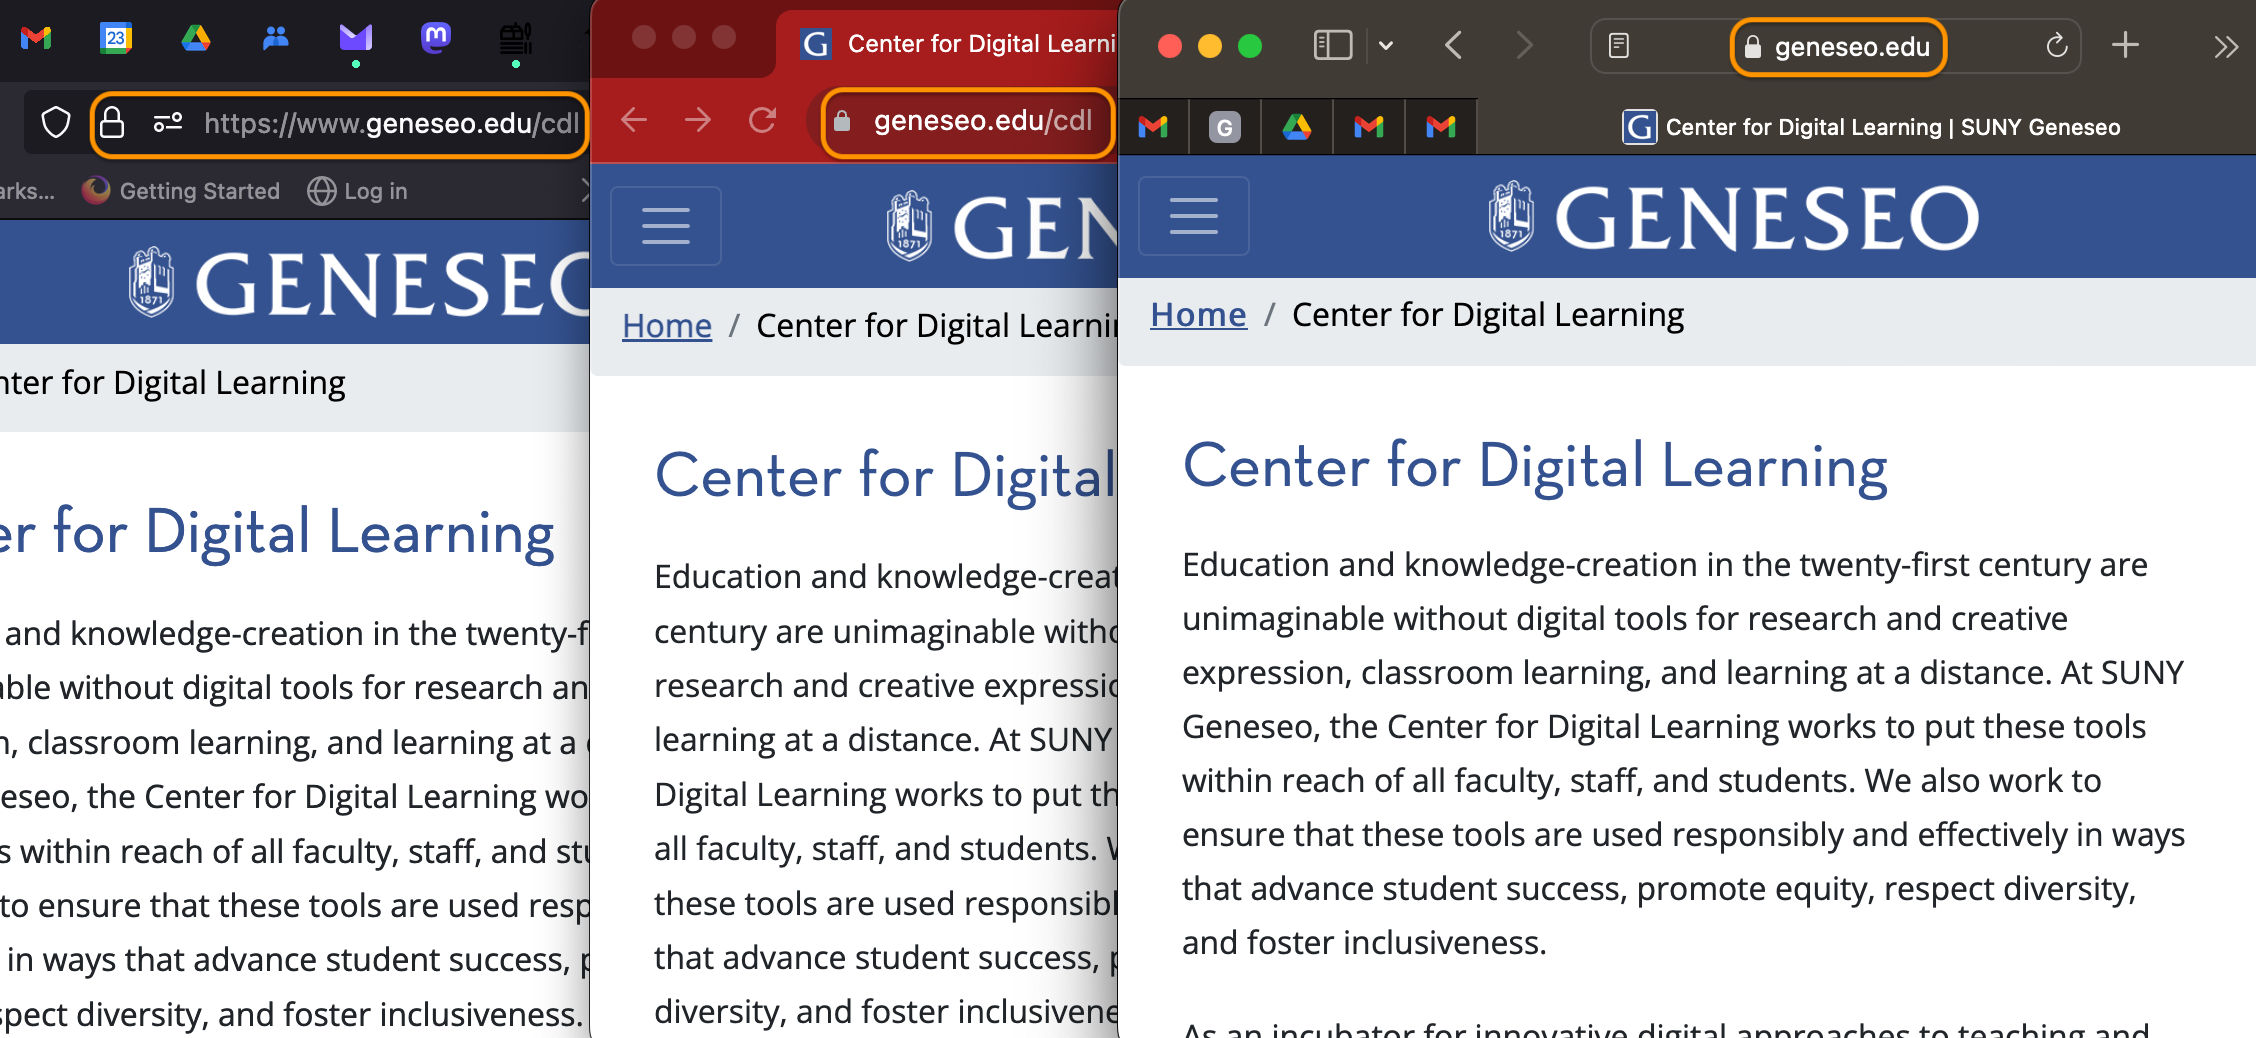 The landing page URL for Geneseo CDL as it appears in three different browsers